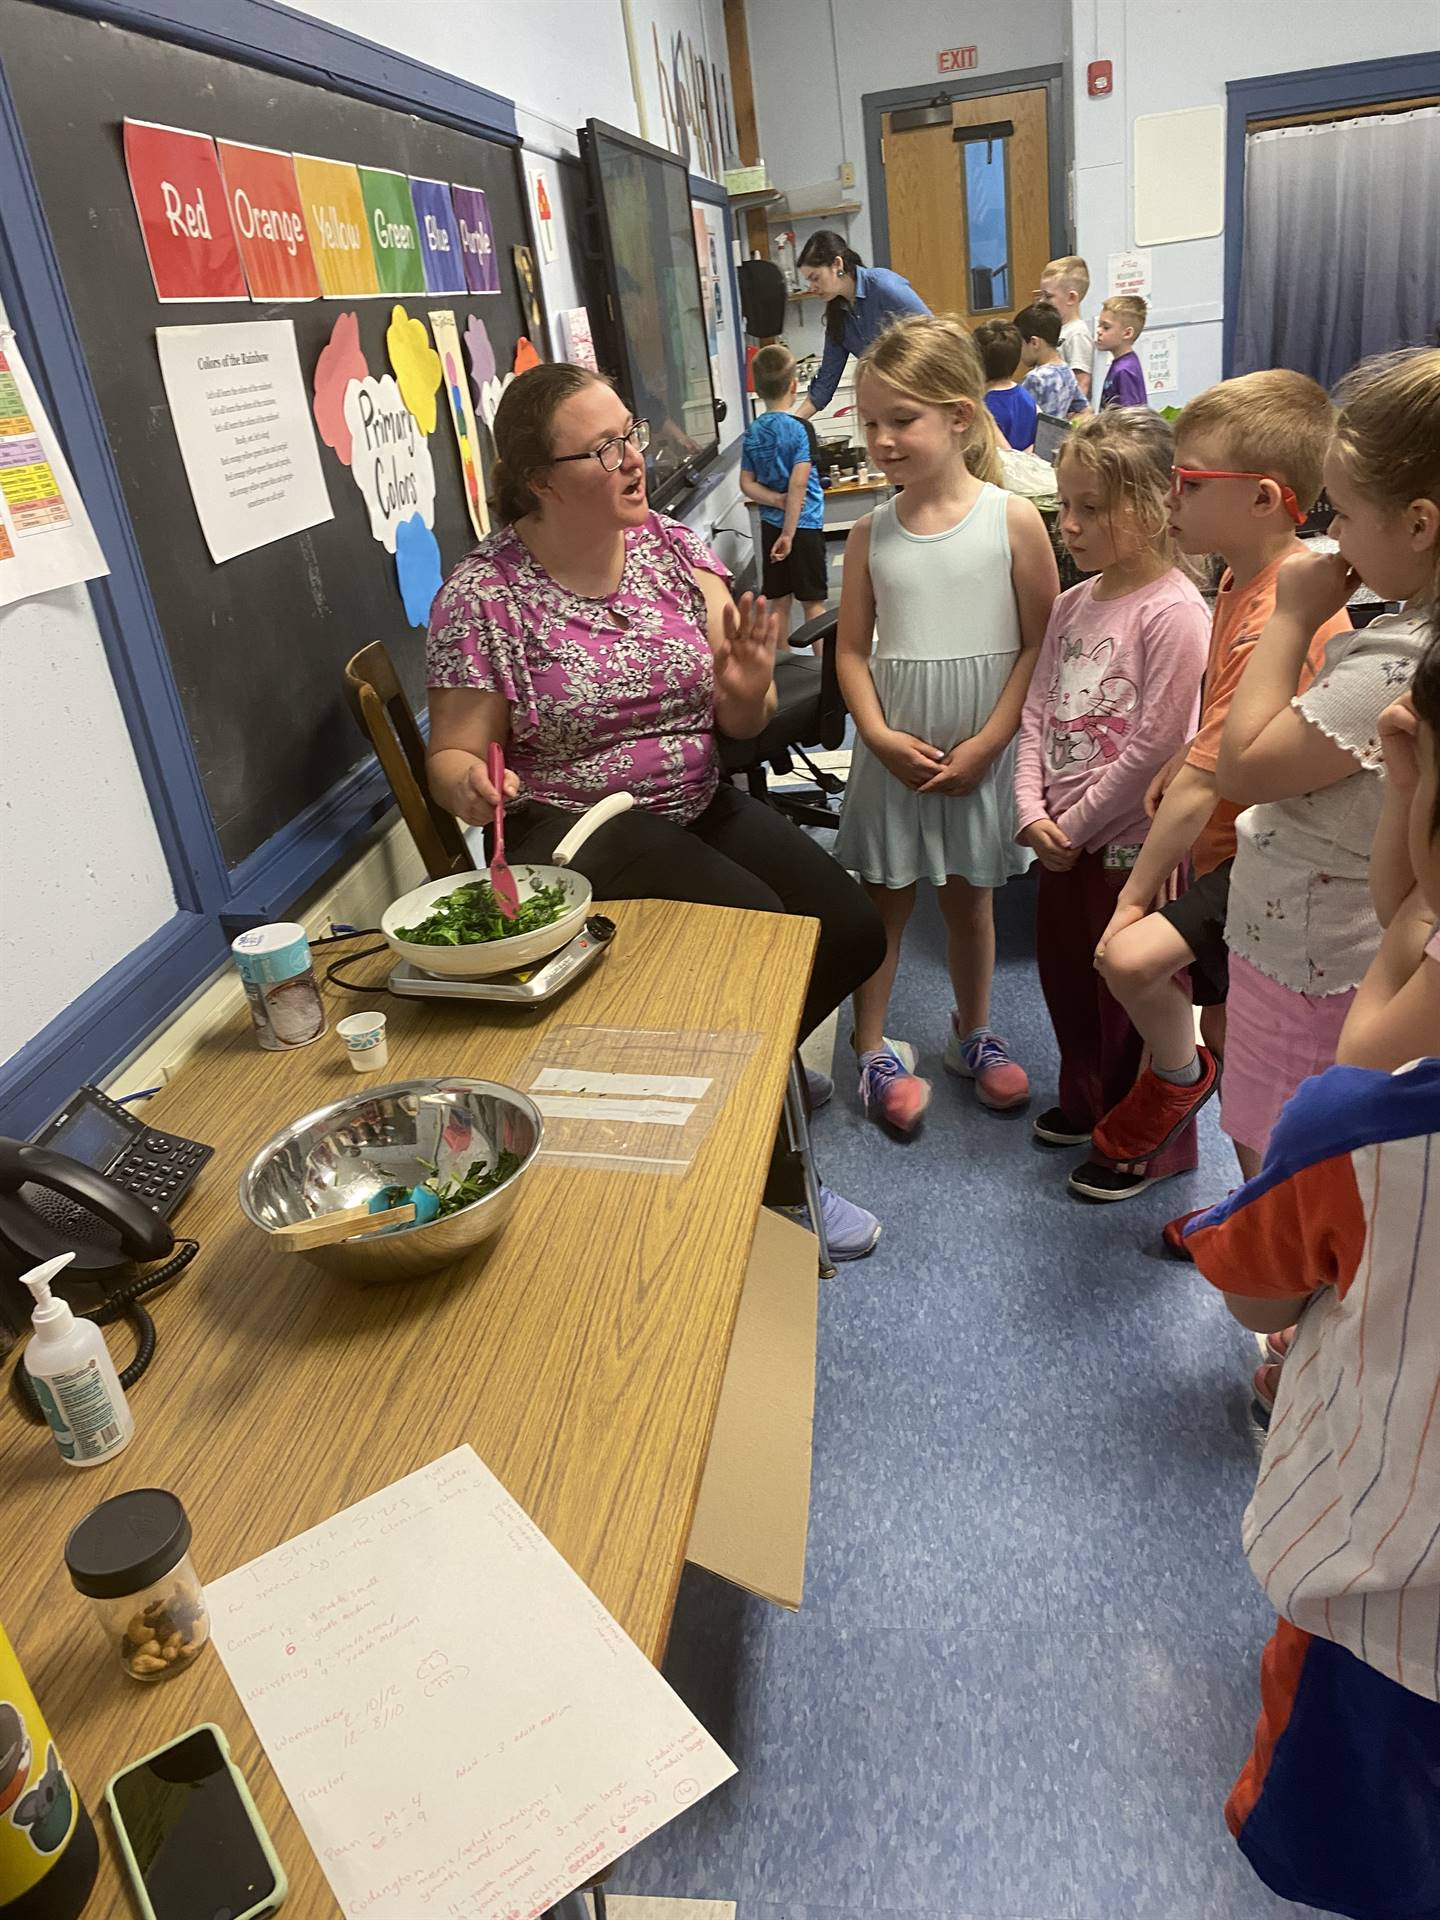 an adult cooking green plants while students observe.